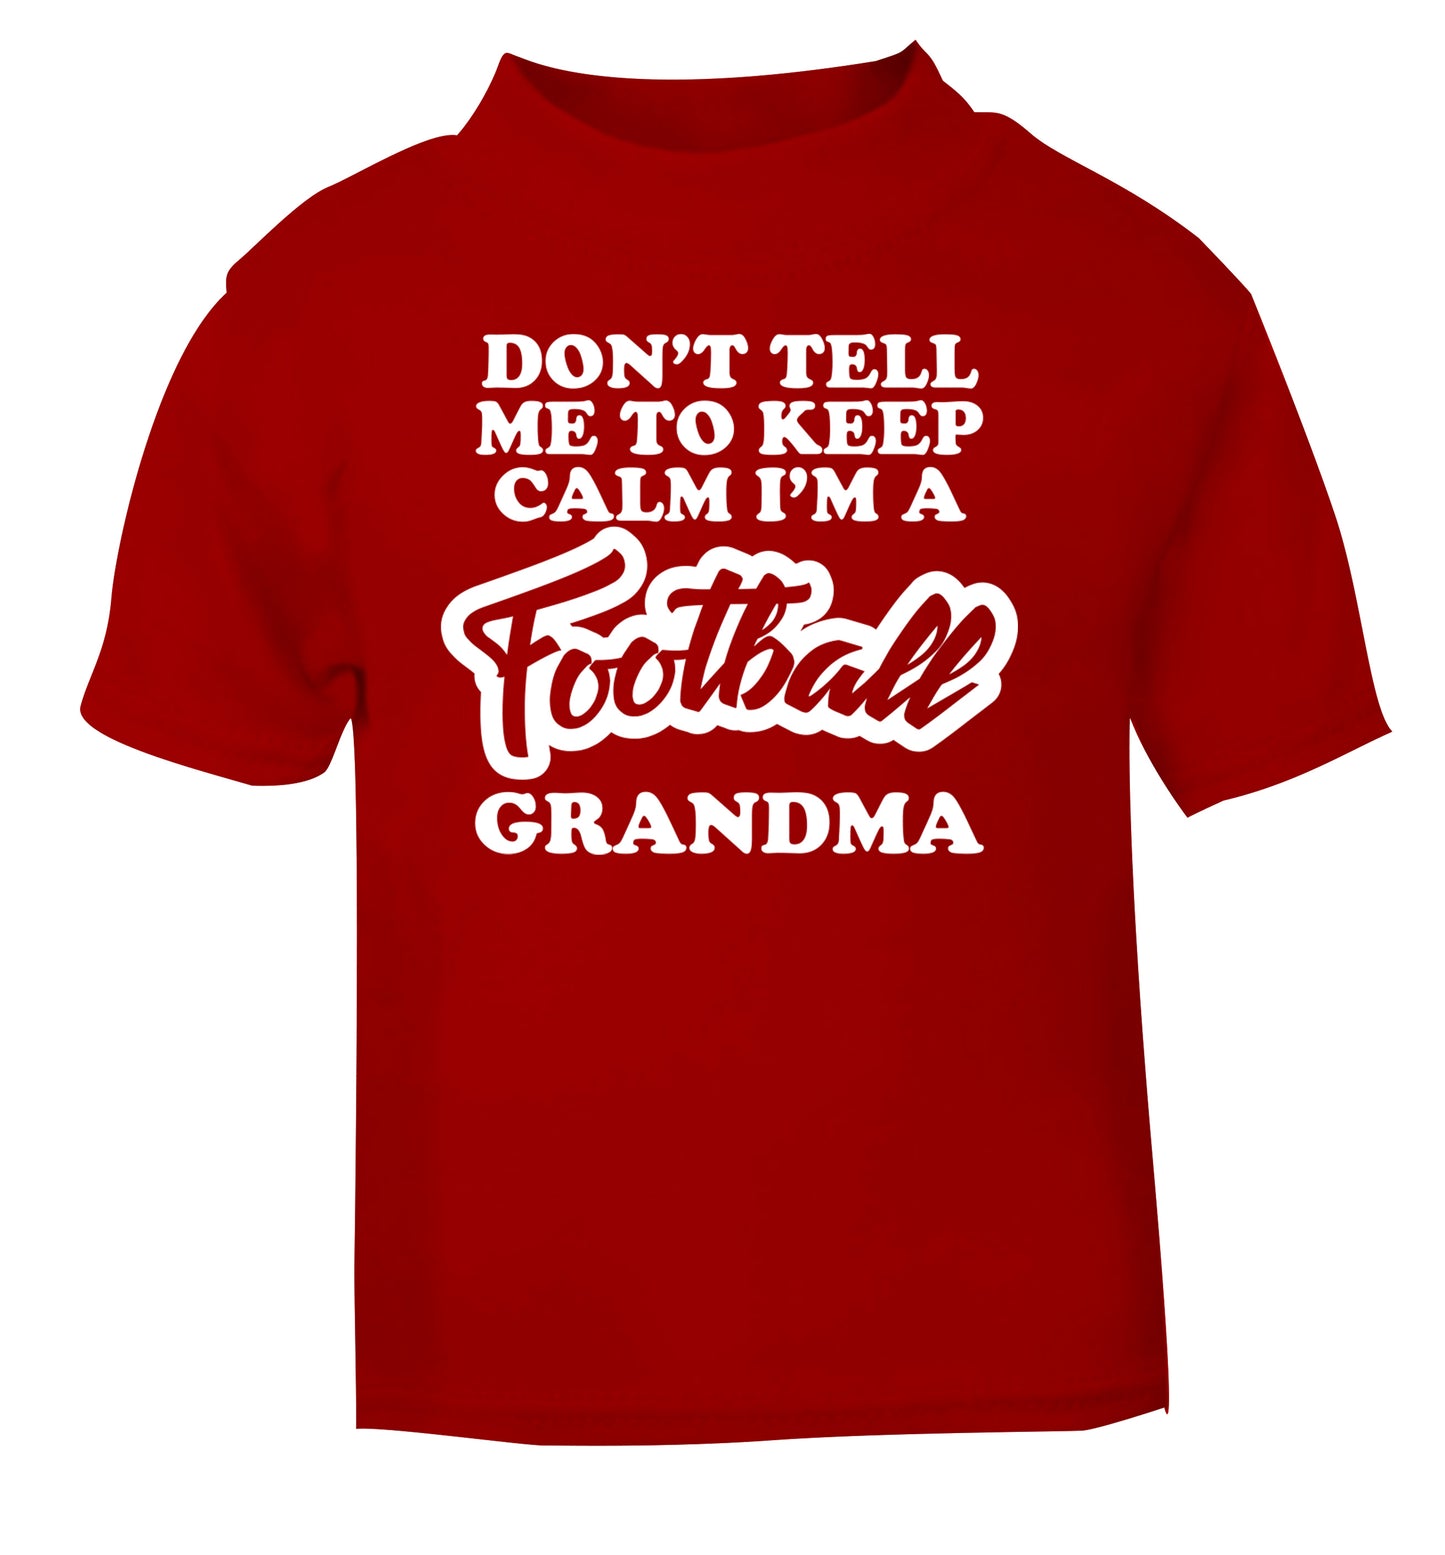 Don't tell me to keep calm I'm a football grandma red Baby Toddler Tshirt 2 Years